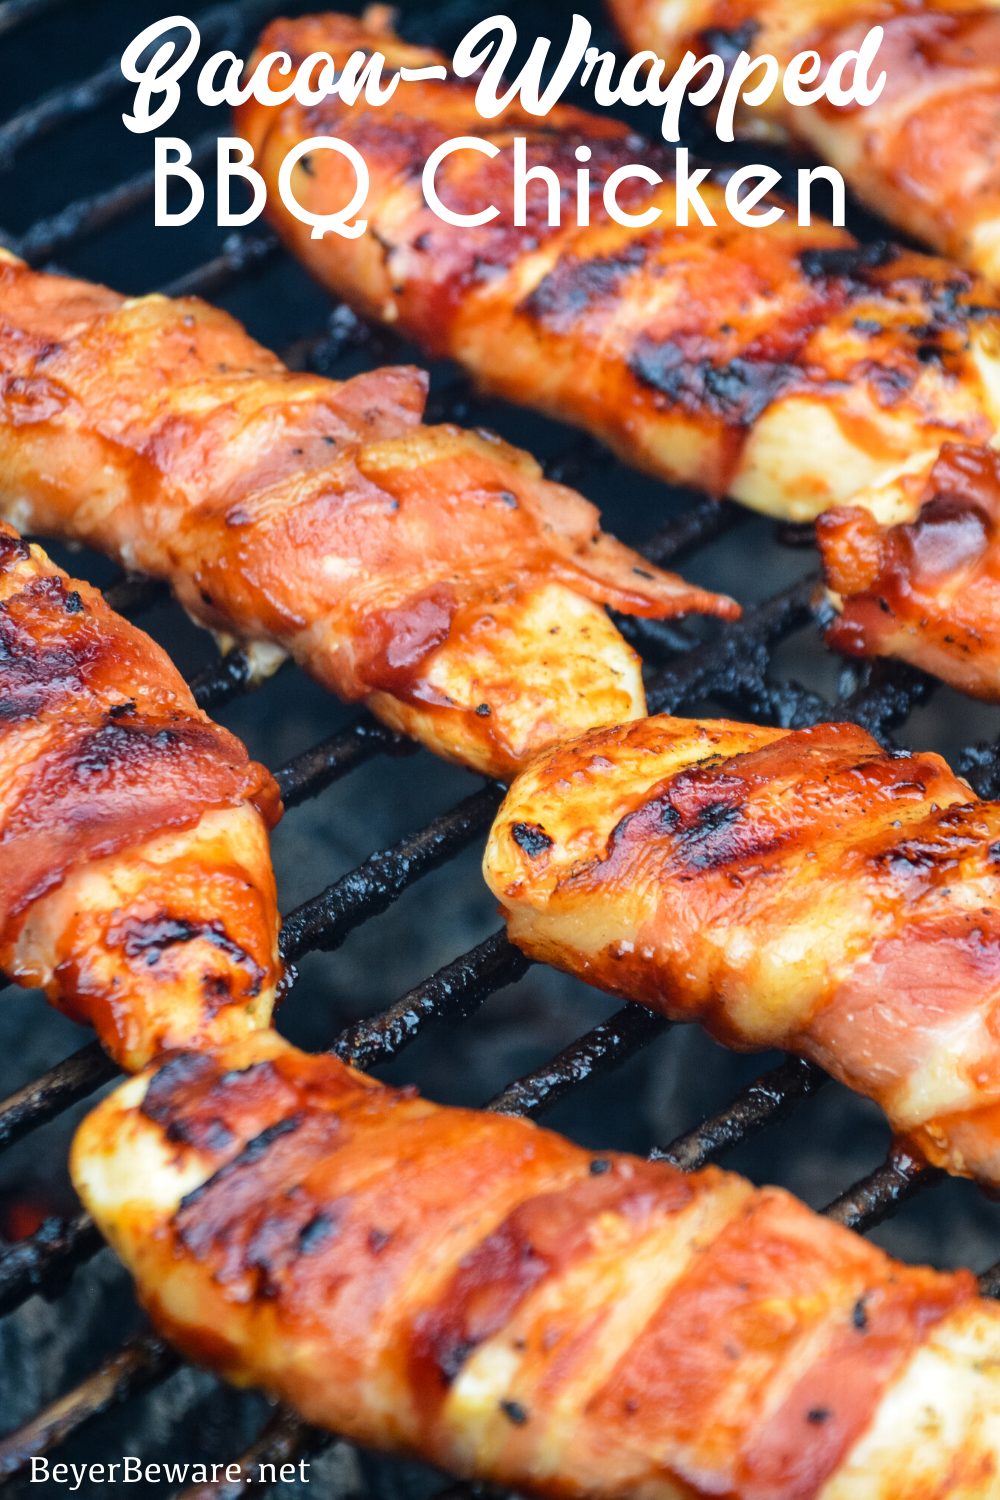 Grilled bacon-wrapped BBQ chicken recipe is lightly seasoned chicken tenderloins that are then wrapped in bacon and then coated in a doctored up barbeque sauce before quickly grilling to perfection.